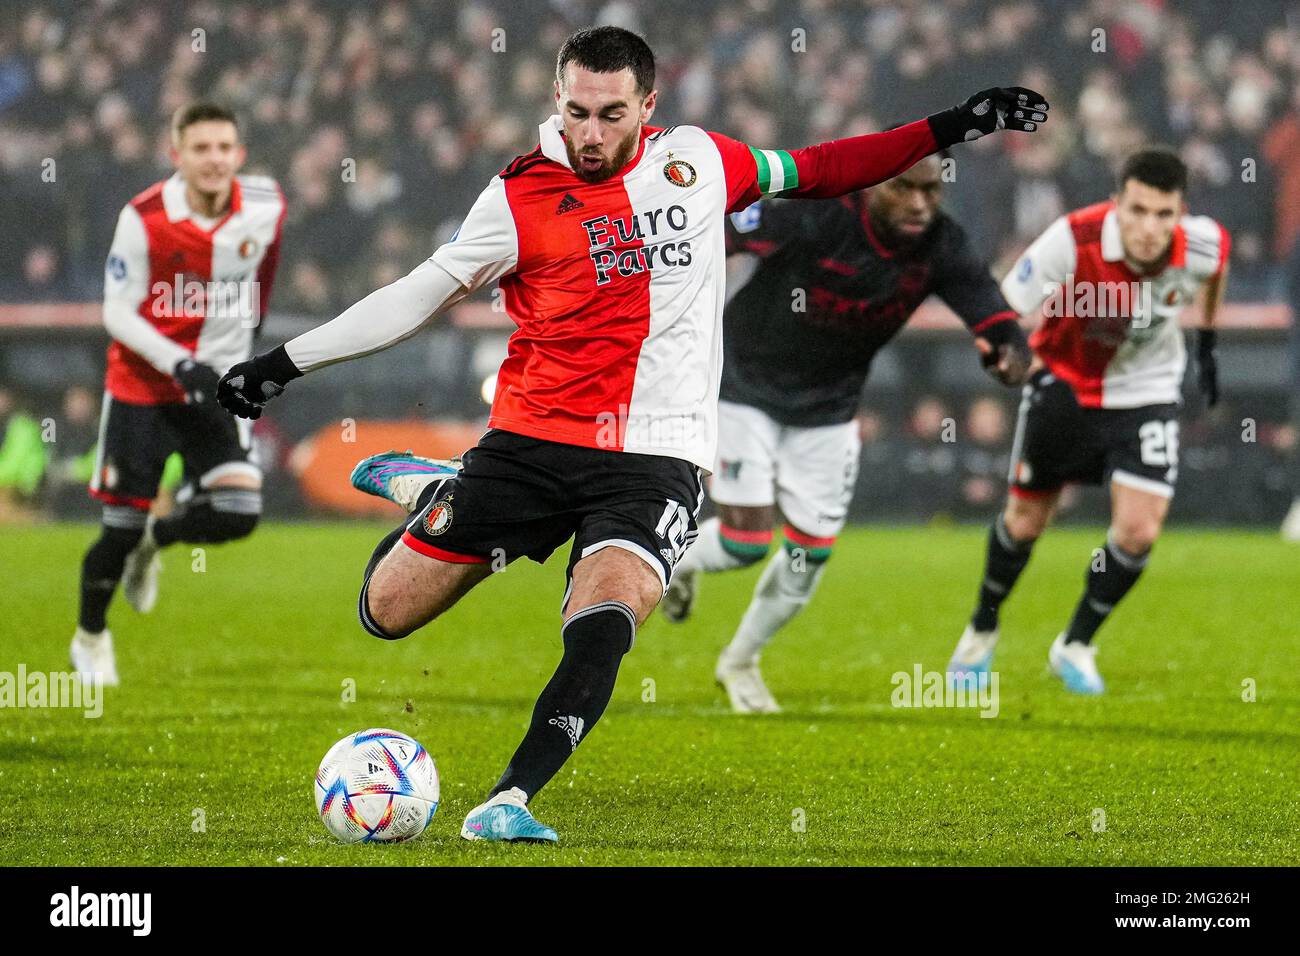 Rotterdam - Orkun Kokcu of Feyenoord scores the 2-0 during the match between Feyenoord v NEC Nijmegen at Stadion Feijenoord De Kuip on 25 January 2023 in Rotterdam, Netherlands. (Box to Box Pictures/Tom Bode) Stock Photo